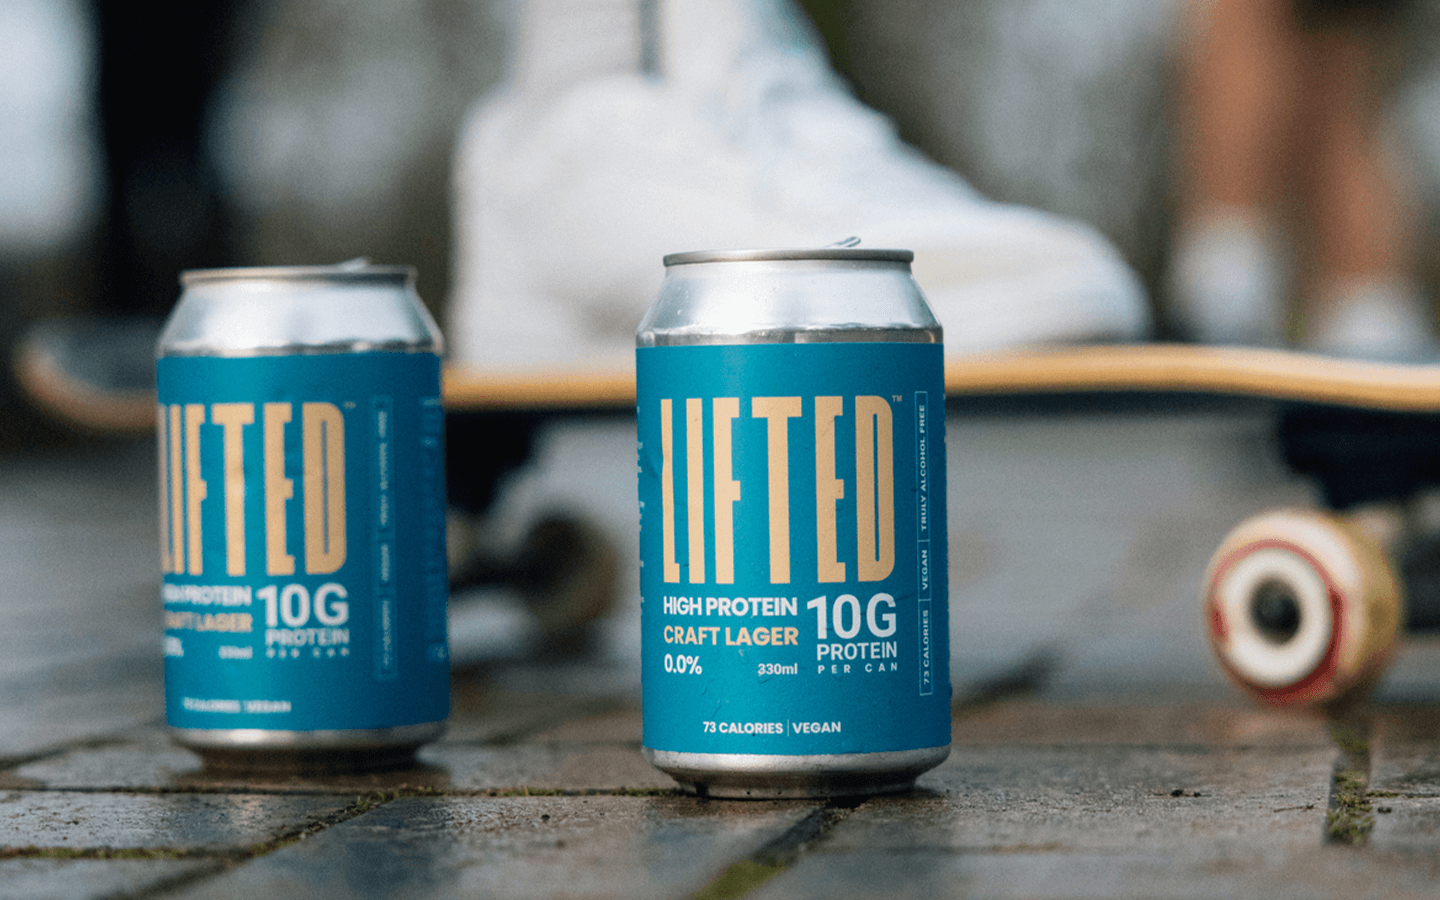 Lifted Alcohol Free High Protein Beer Reviewed